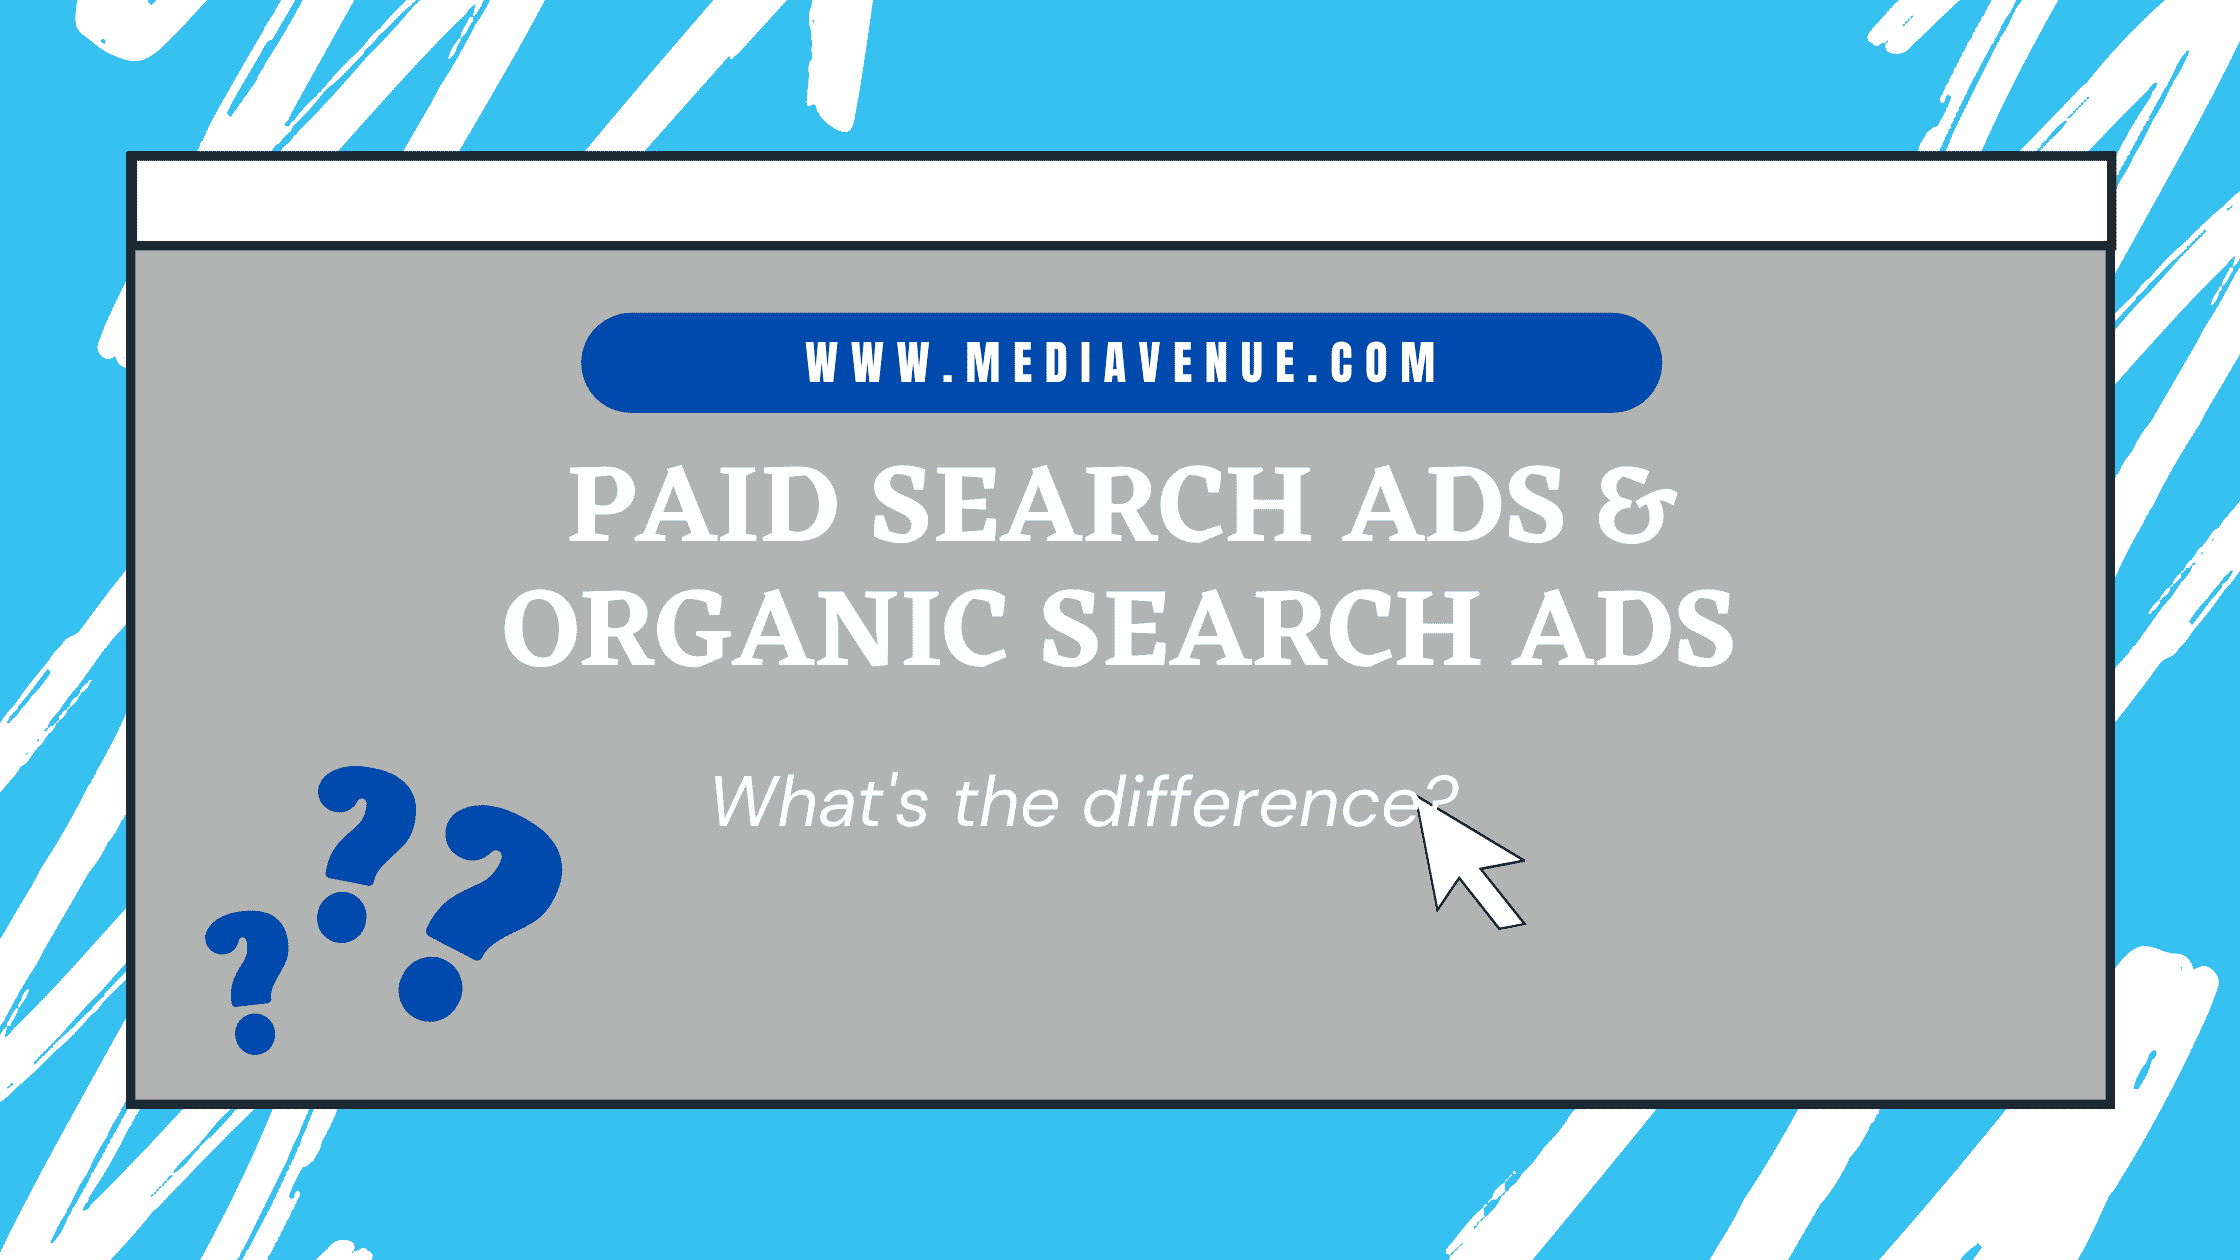 Paid Search Ads and Organic Search Ads? What's the Difference?